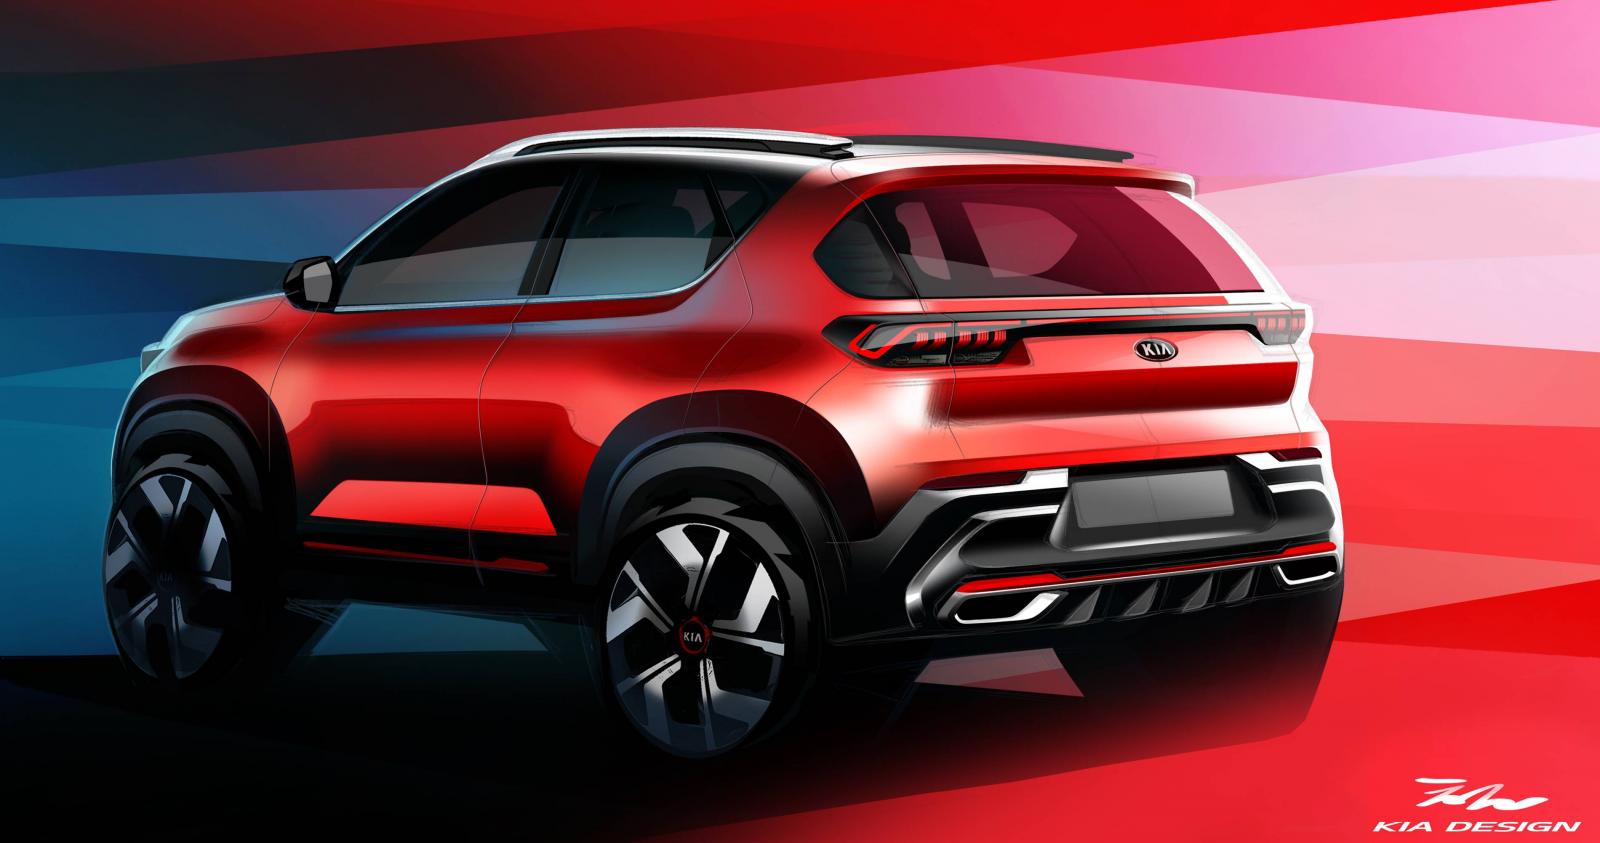 Kia Sonet Official Image Revealed Ahead Of Global Premiere On August 7